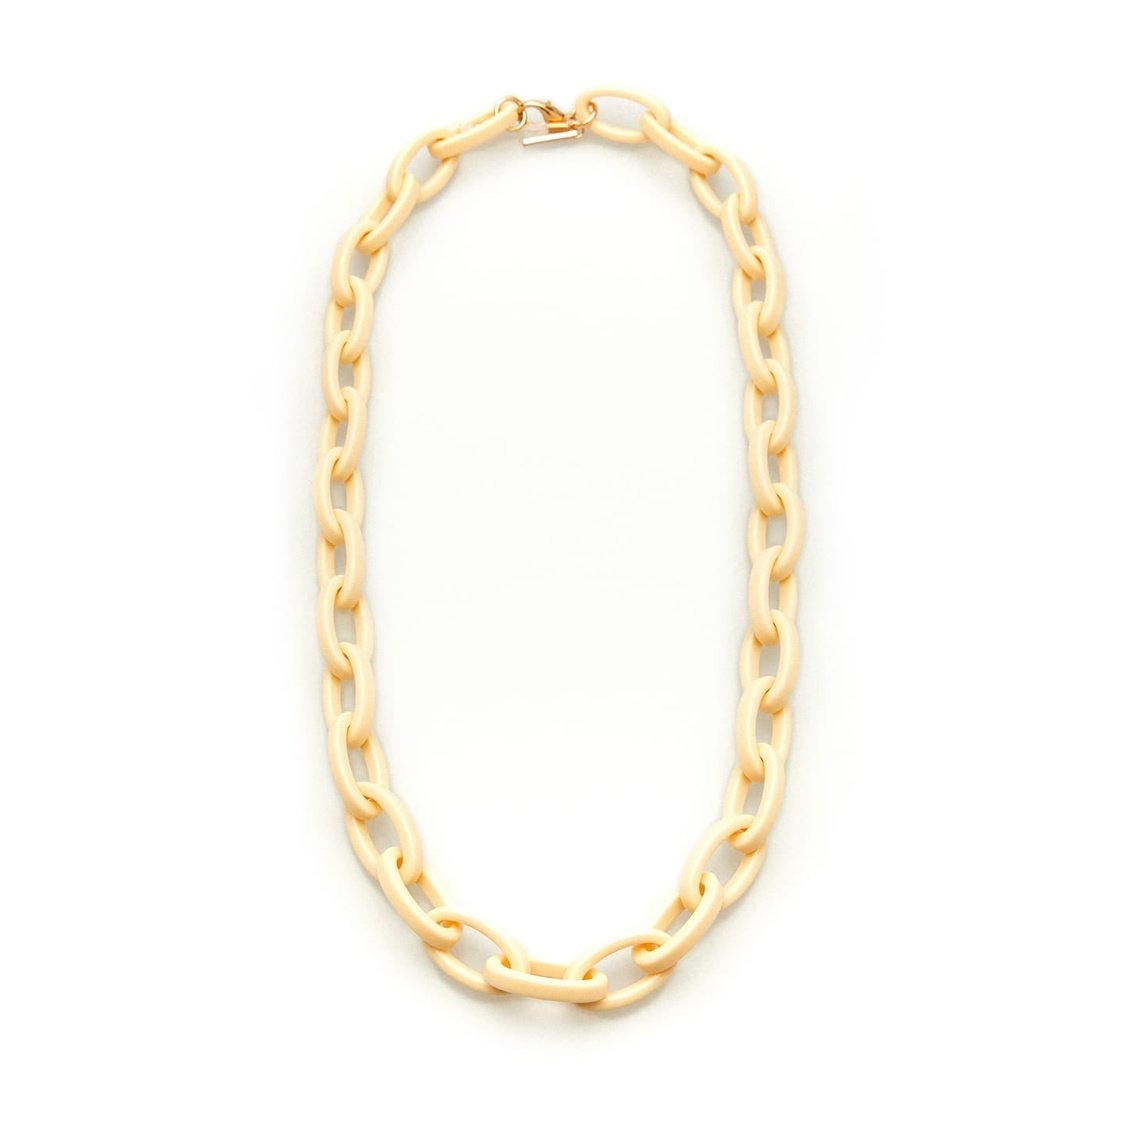 Oval Resin Chain - Off White